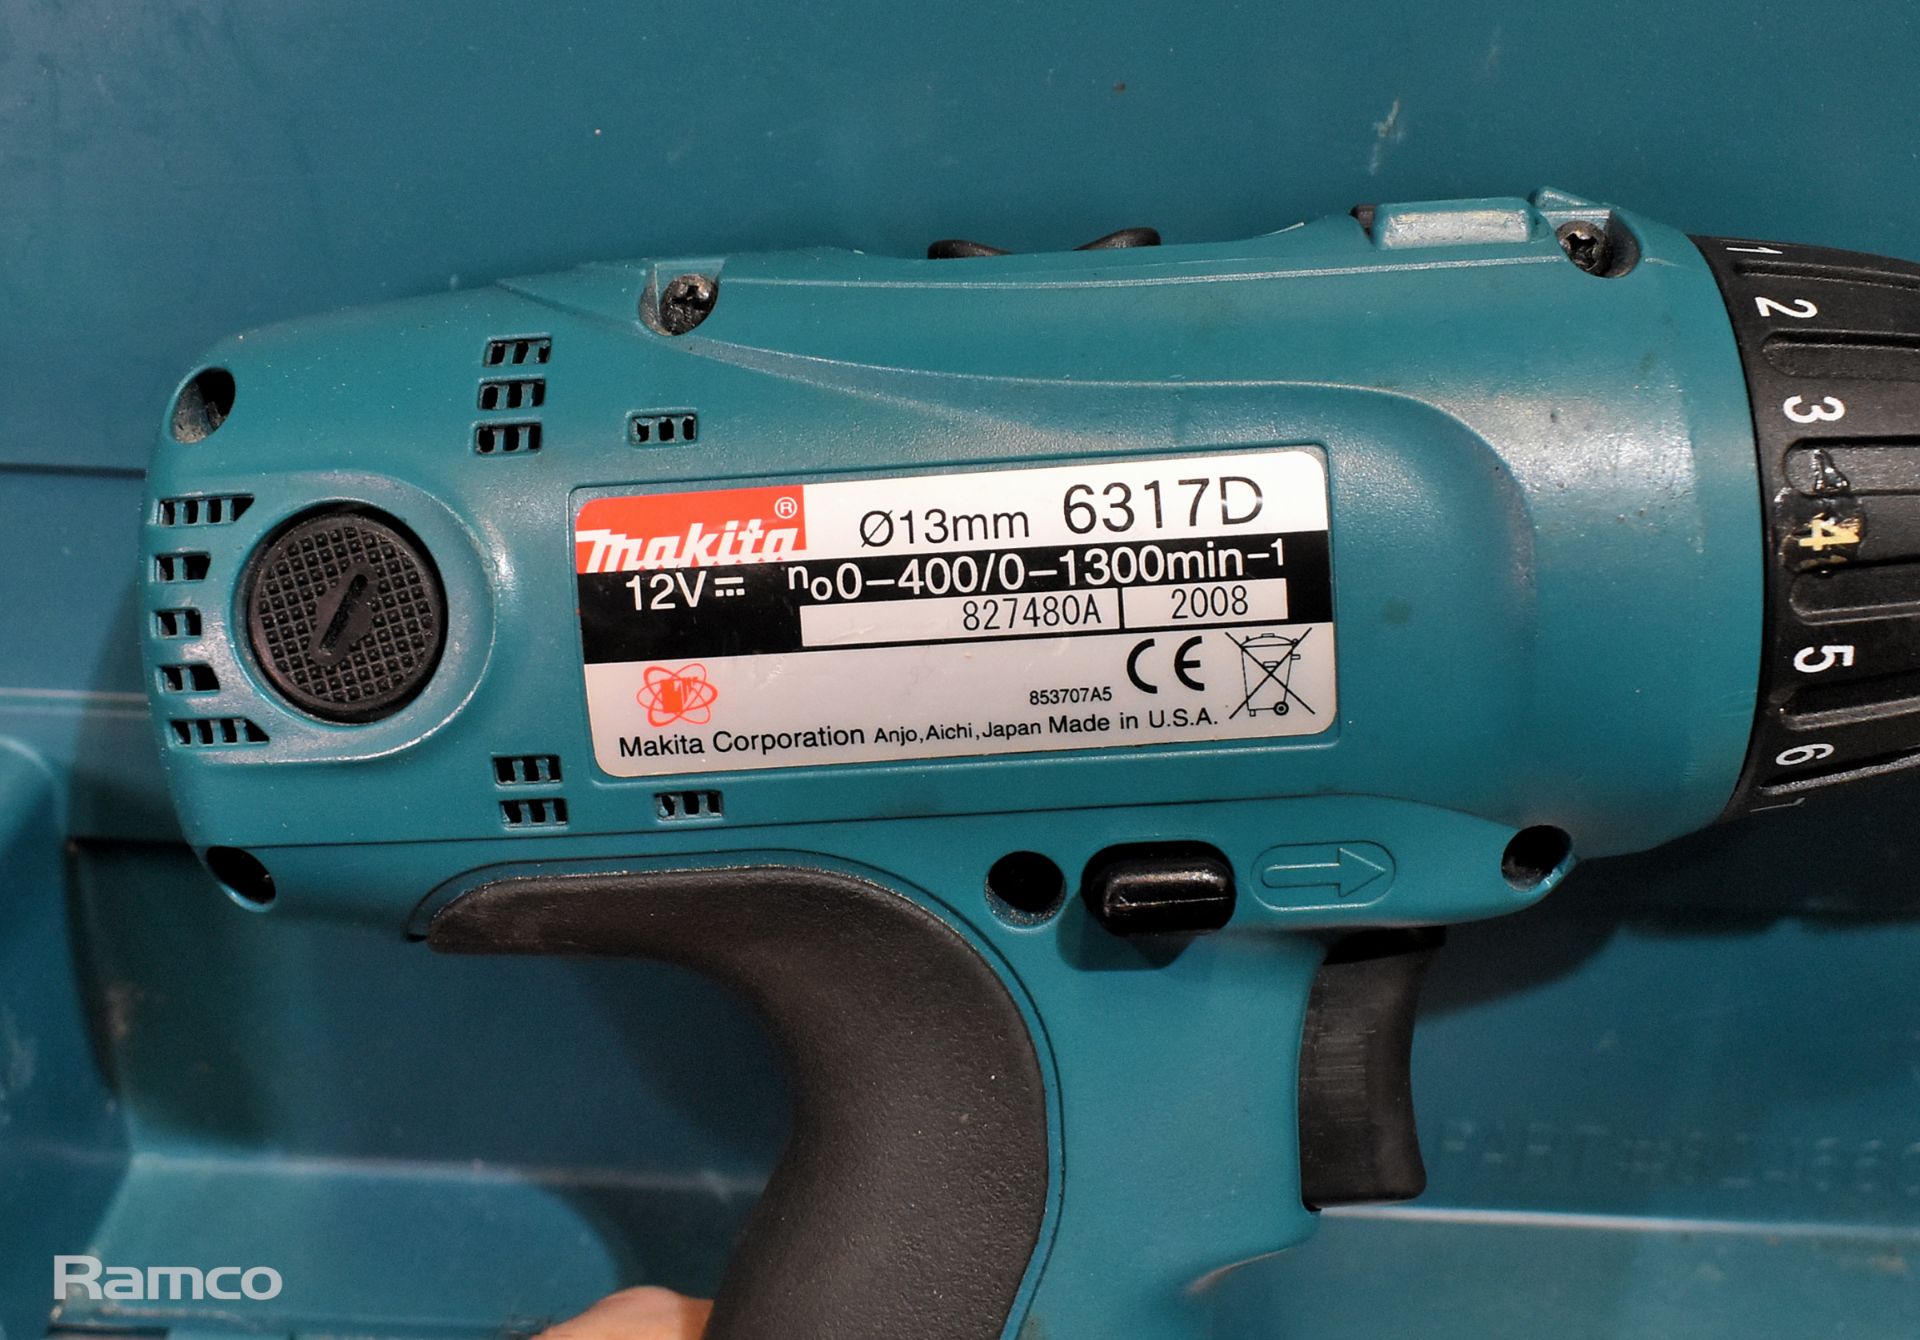 Makita 6317D cordless drill - DC1414F charger - 2 x 12V batteries - case - Image 4 of 6